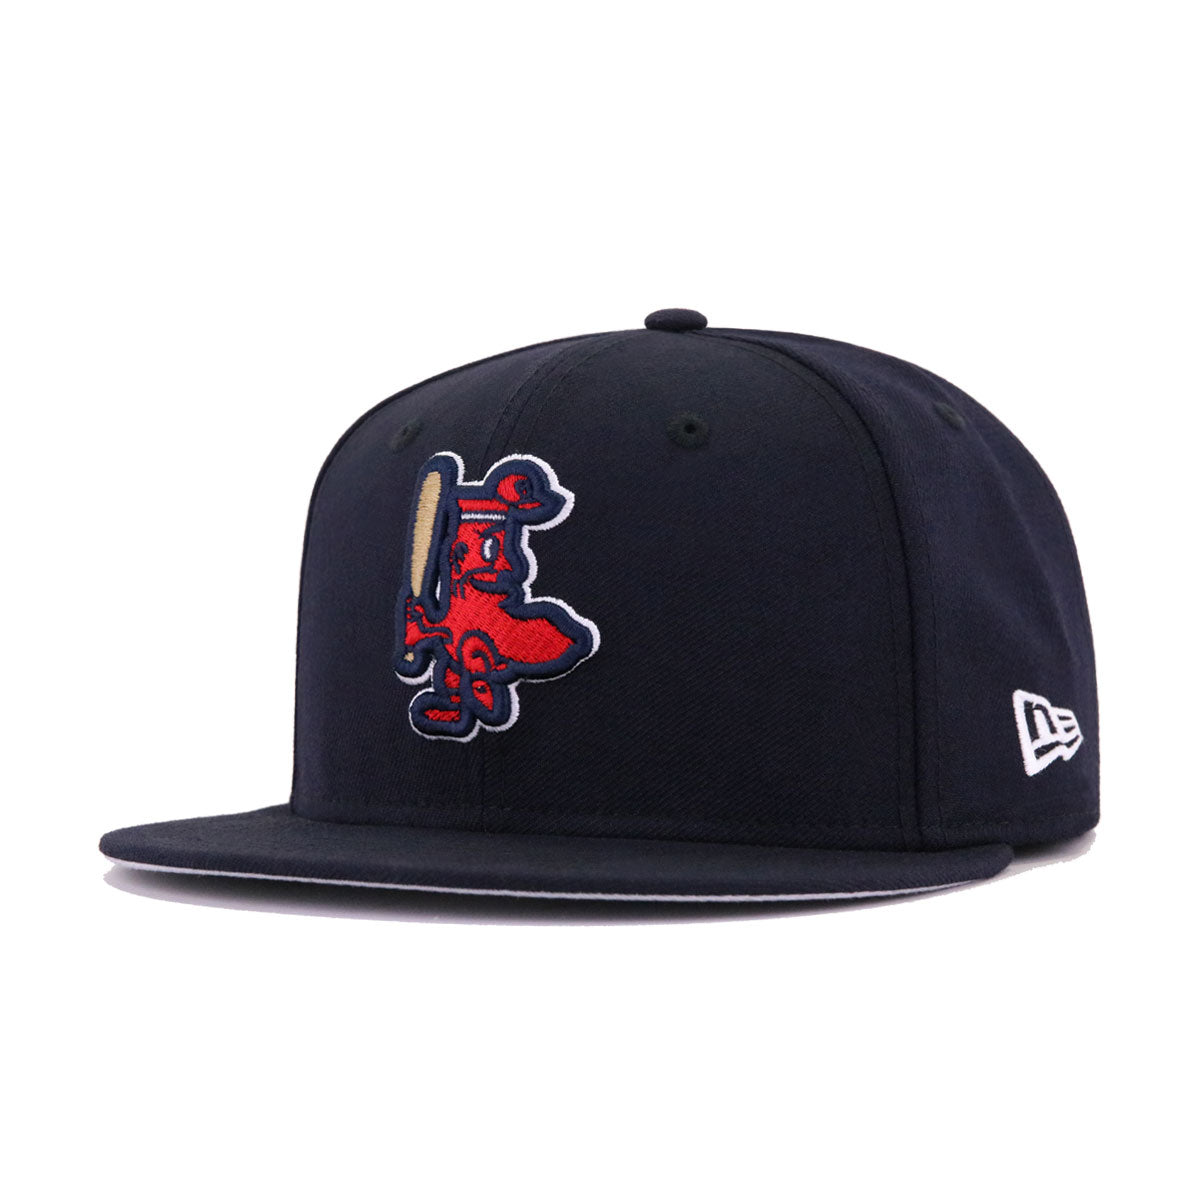 New Era Boston Red Sox Fitted Navy Classic Hat